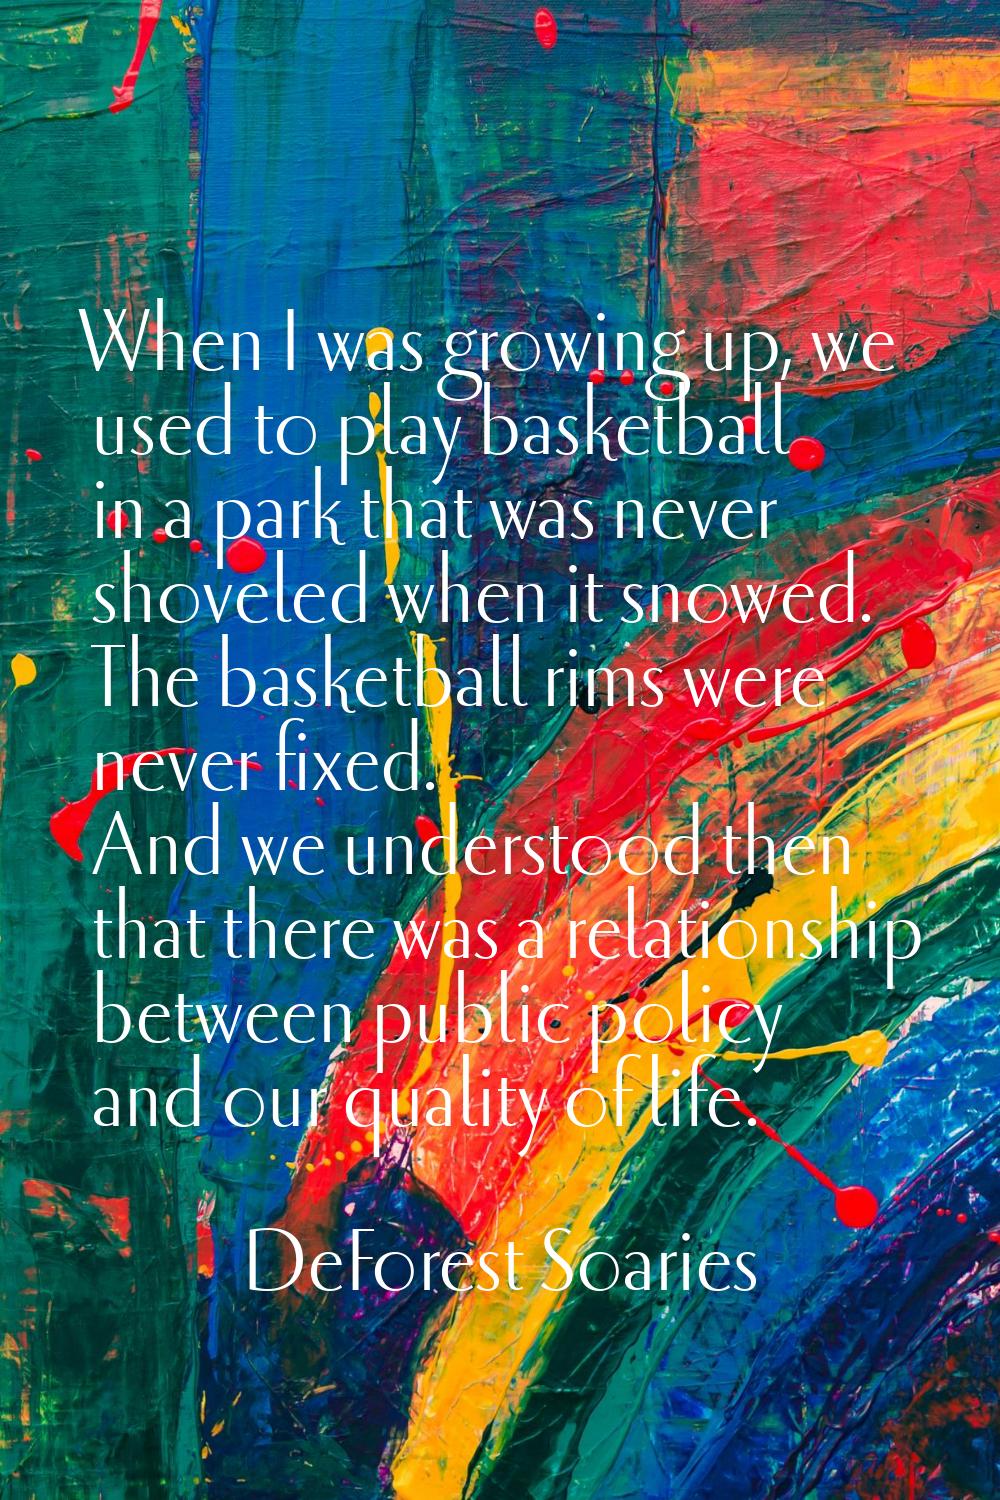 When I was growing up, we used to play basketball in a park that was never shoveled when it snowed.